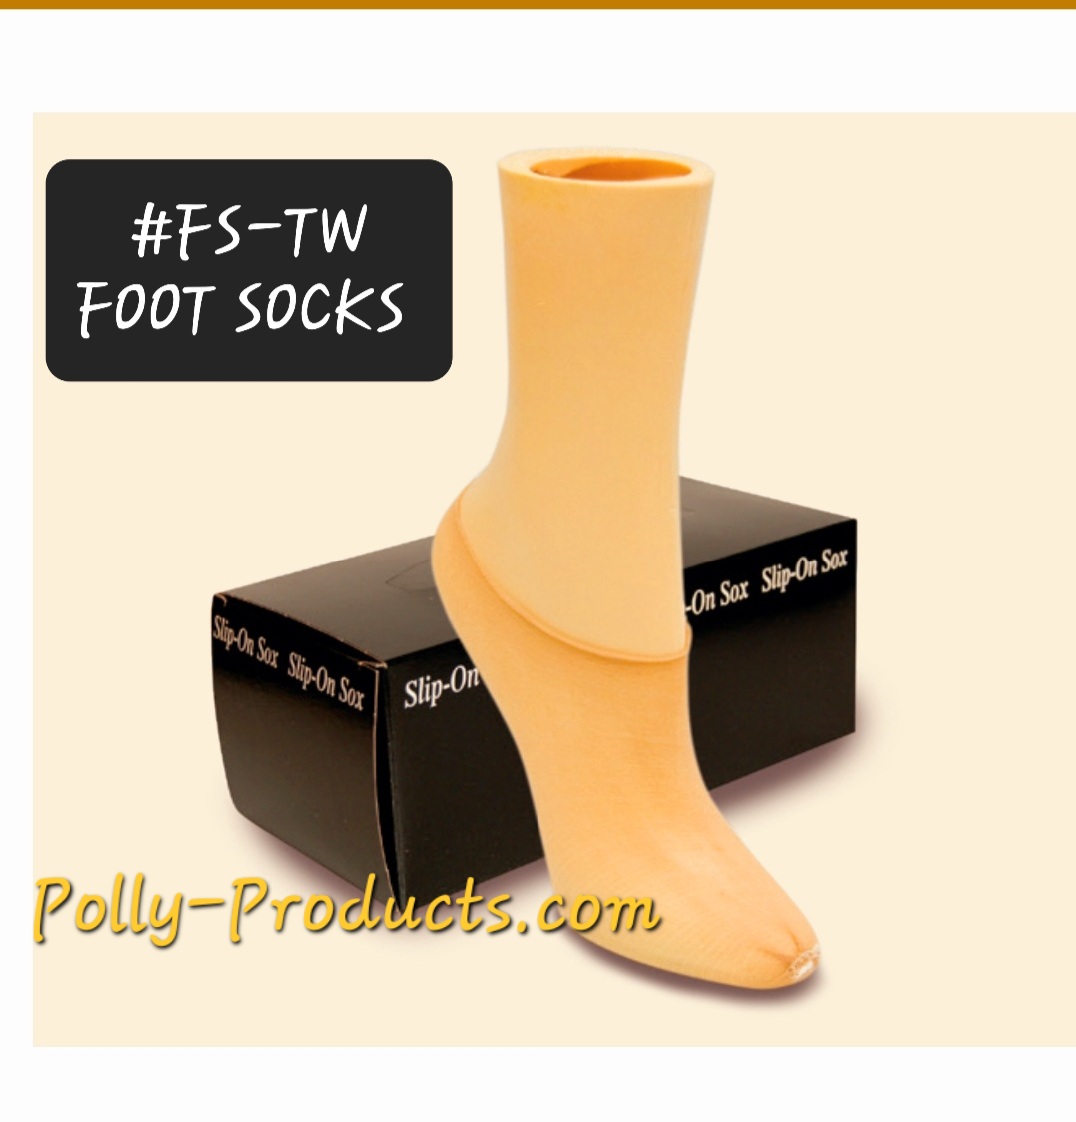 POLLY PRODUCTS MADE IN THE USA TRY-ON SOCKS #FS-TW ANKLE HEIGHT 